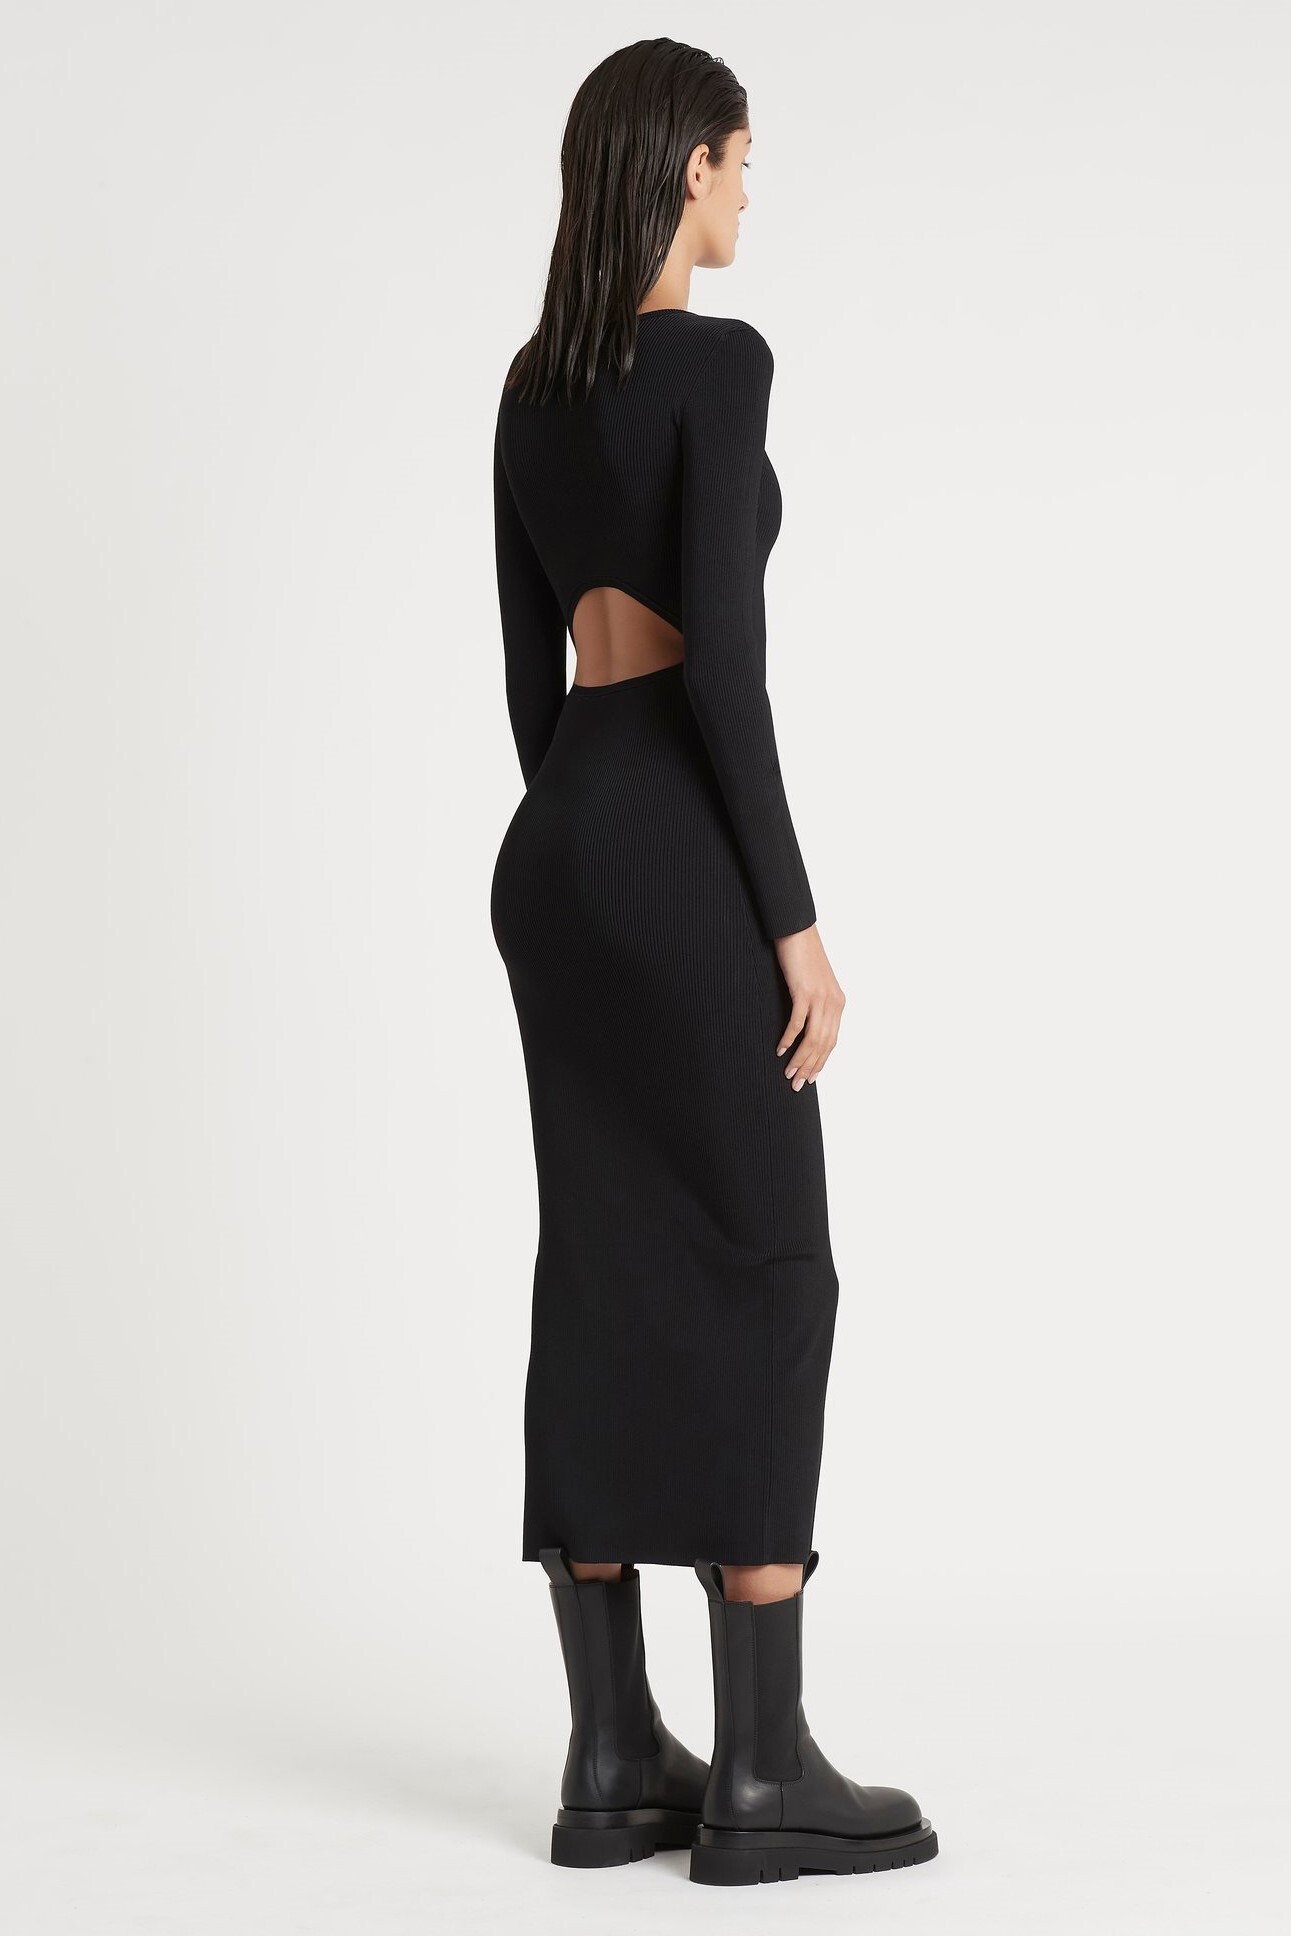 CELLE REVERSIBLE DRESS (BLACK)- SIR AUTUMN WINTER 21 Boxing Day Sale